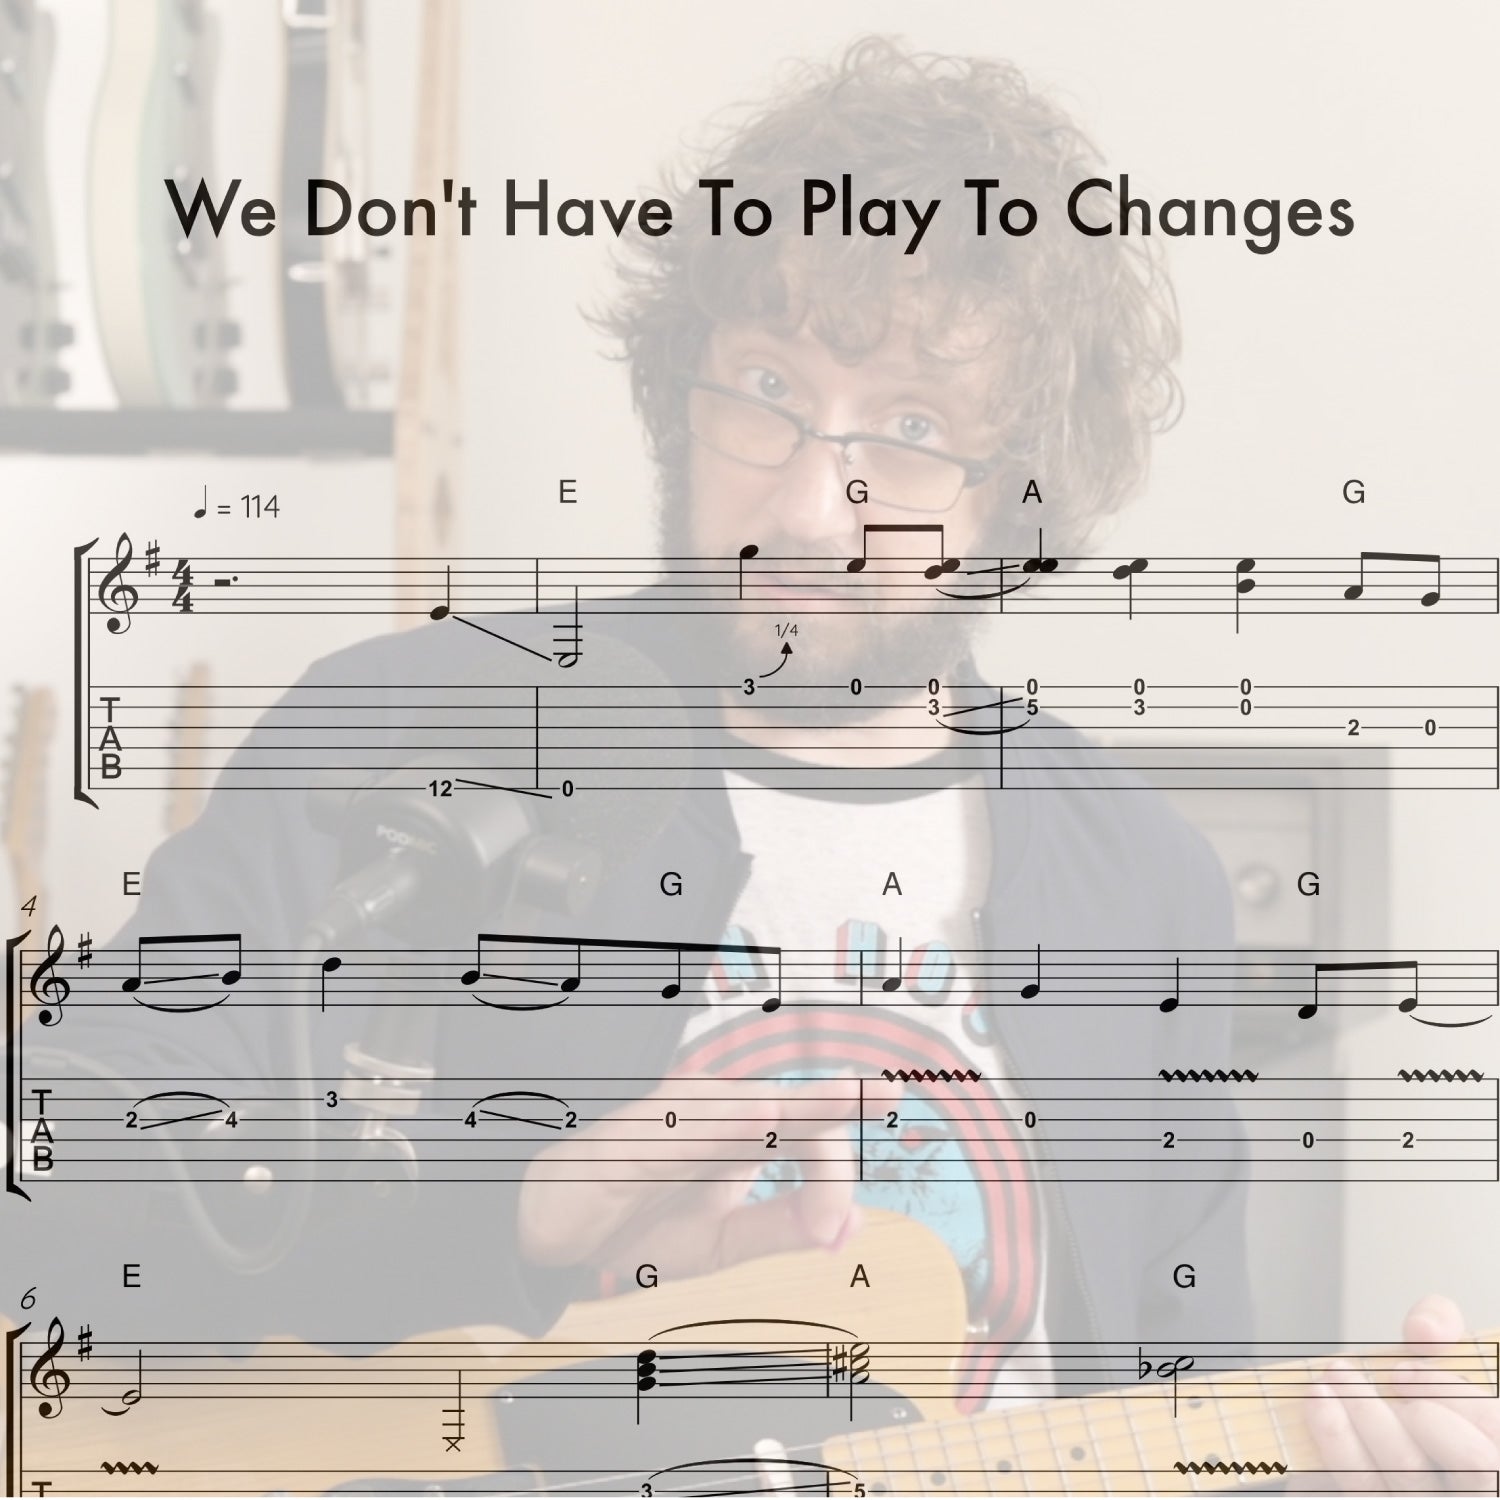 We Don't Have to Play to Changes